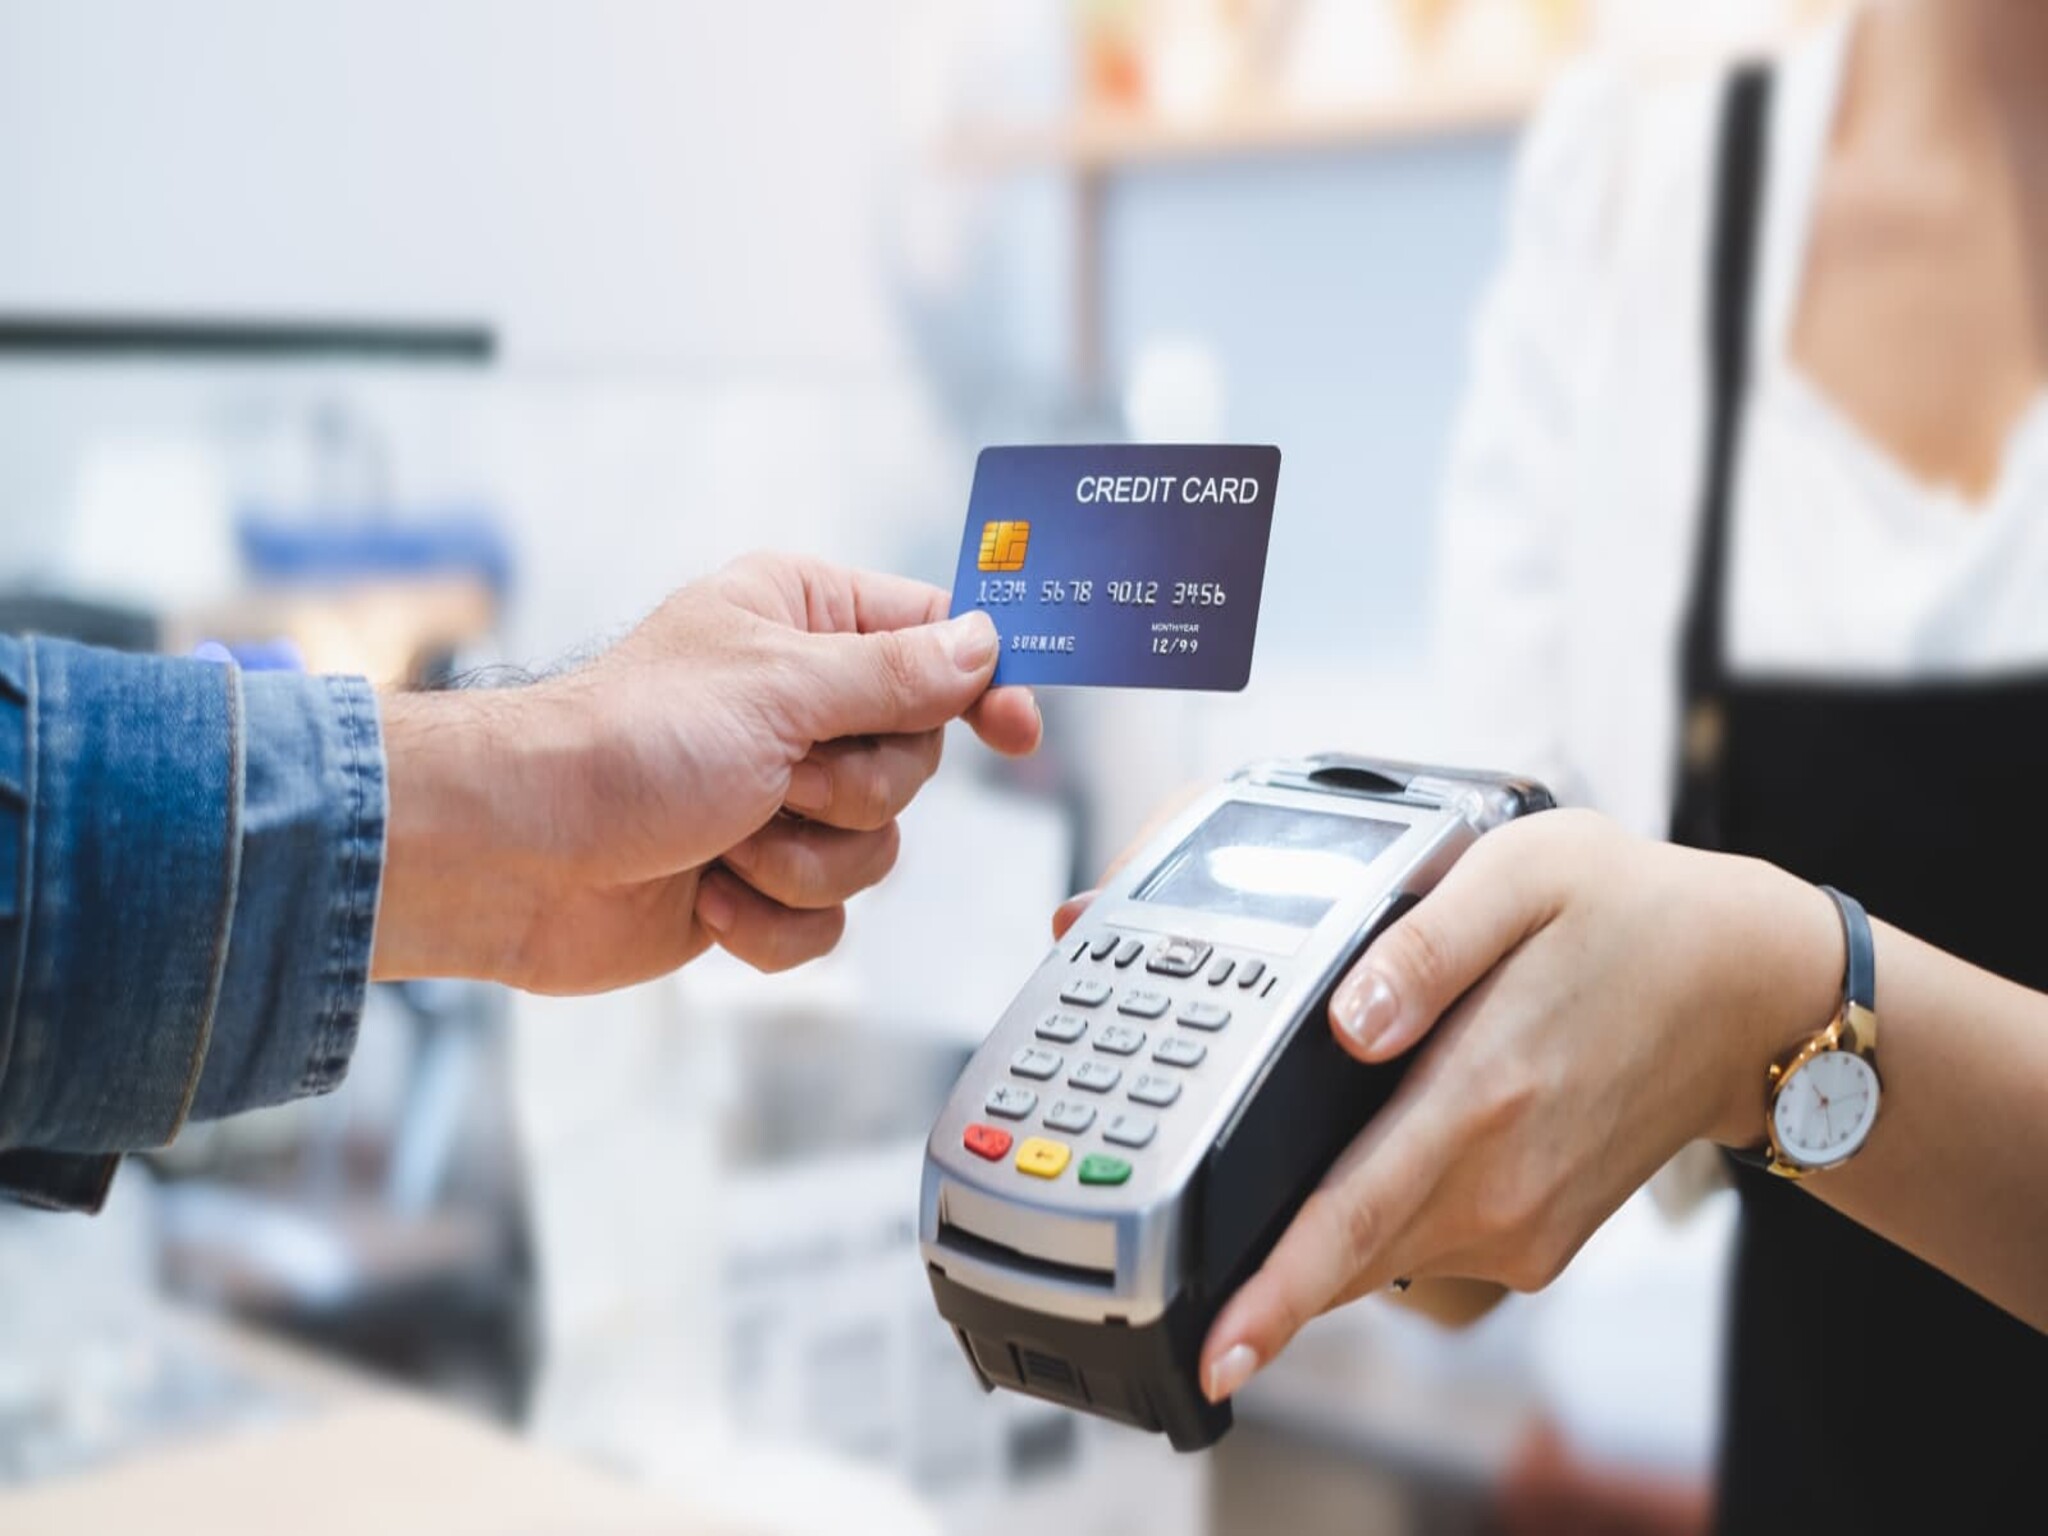 The UAE will soon cancel payment cards and replace them with a more advanced system